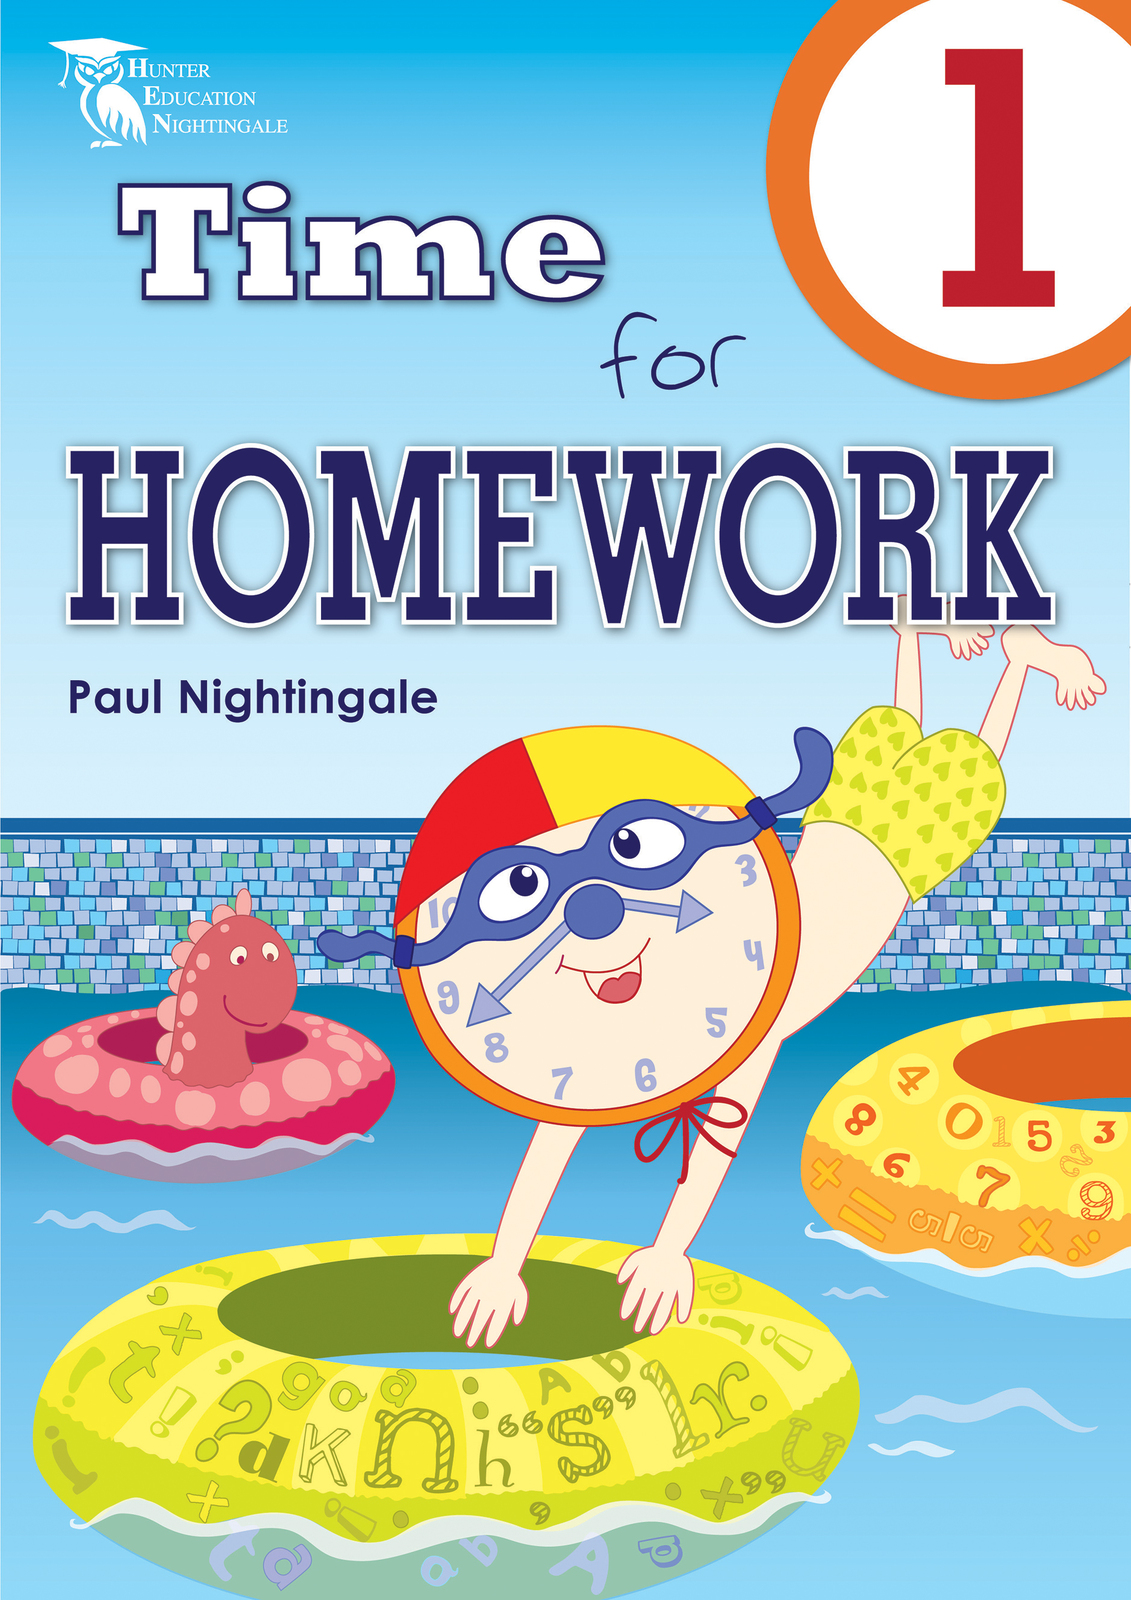 homework time for students